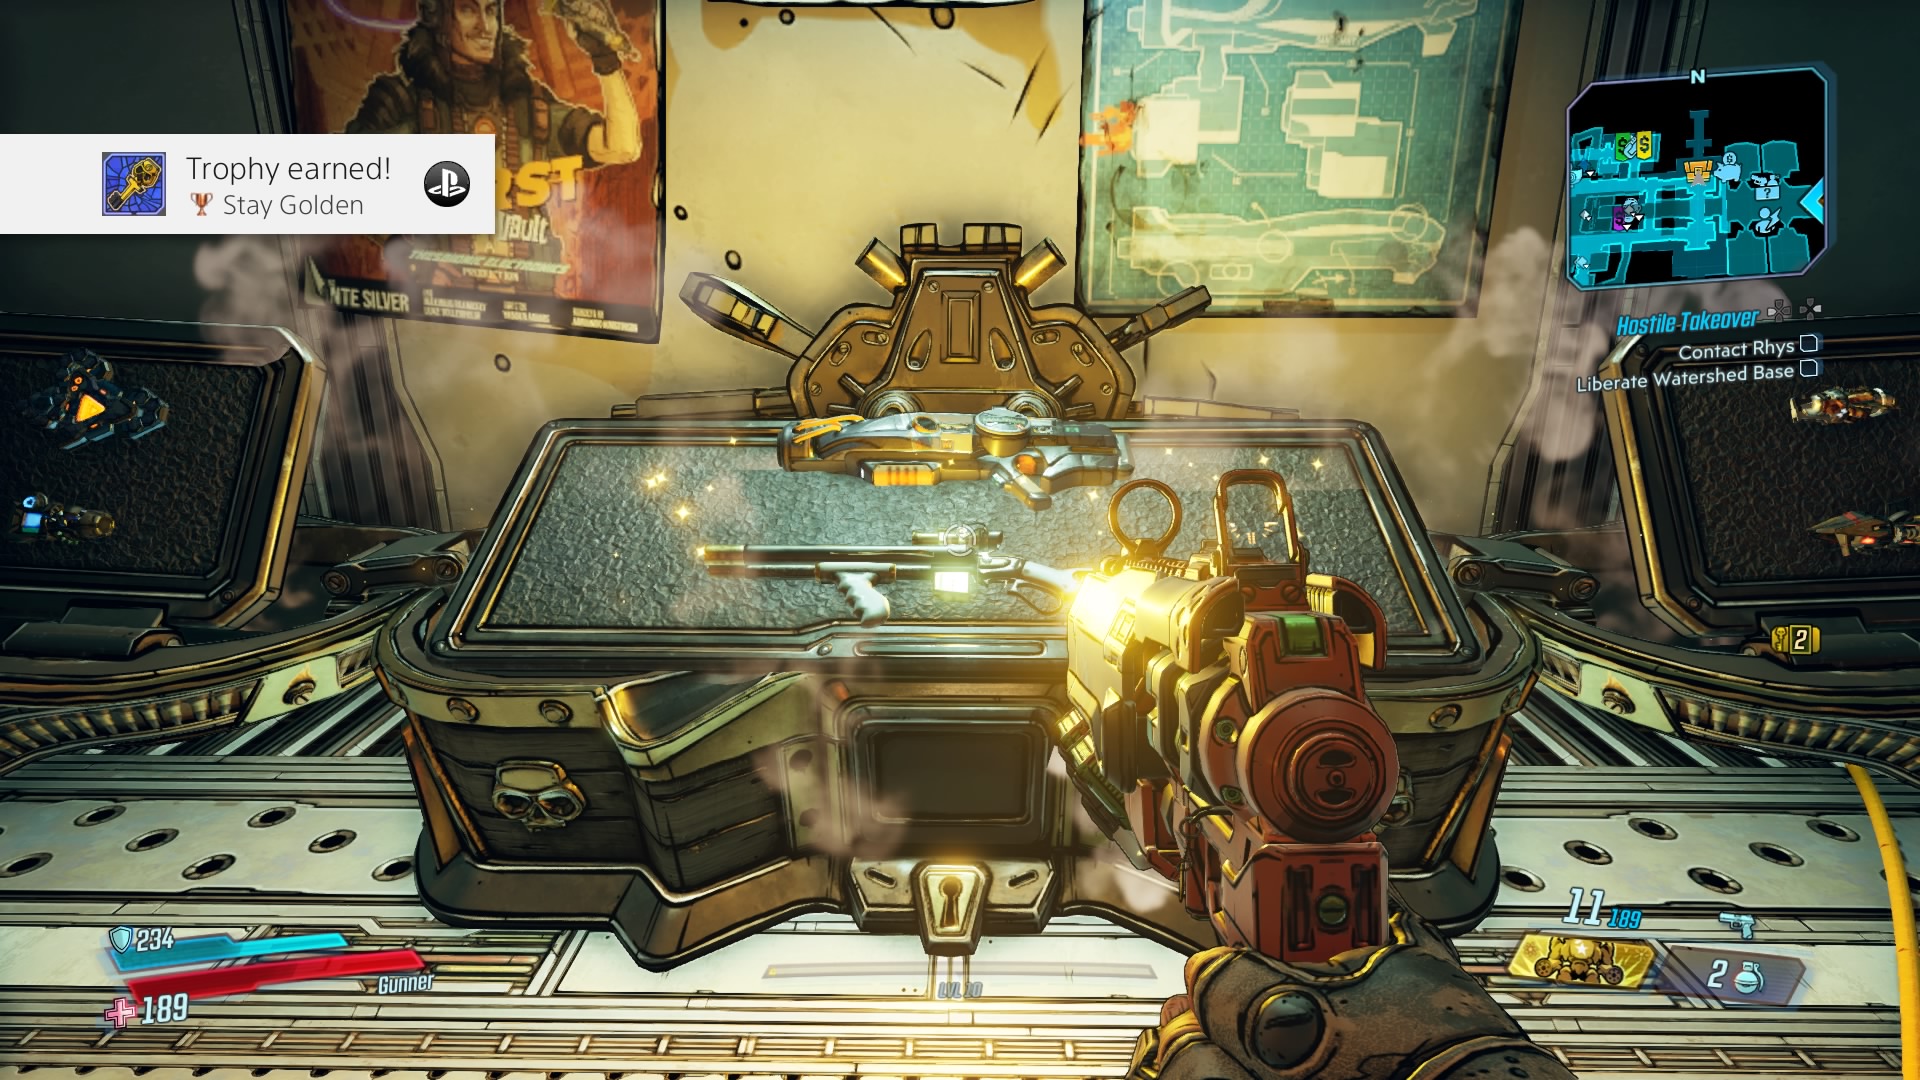 Every Borderlands 3 Shift Code to unlock the Sanctuary 3 Golden Chest